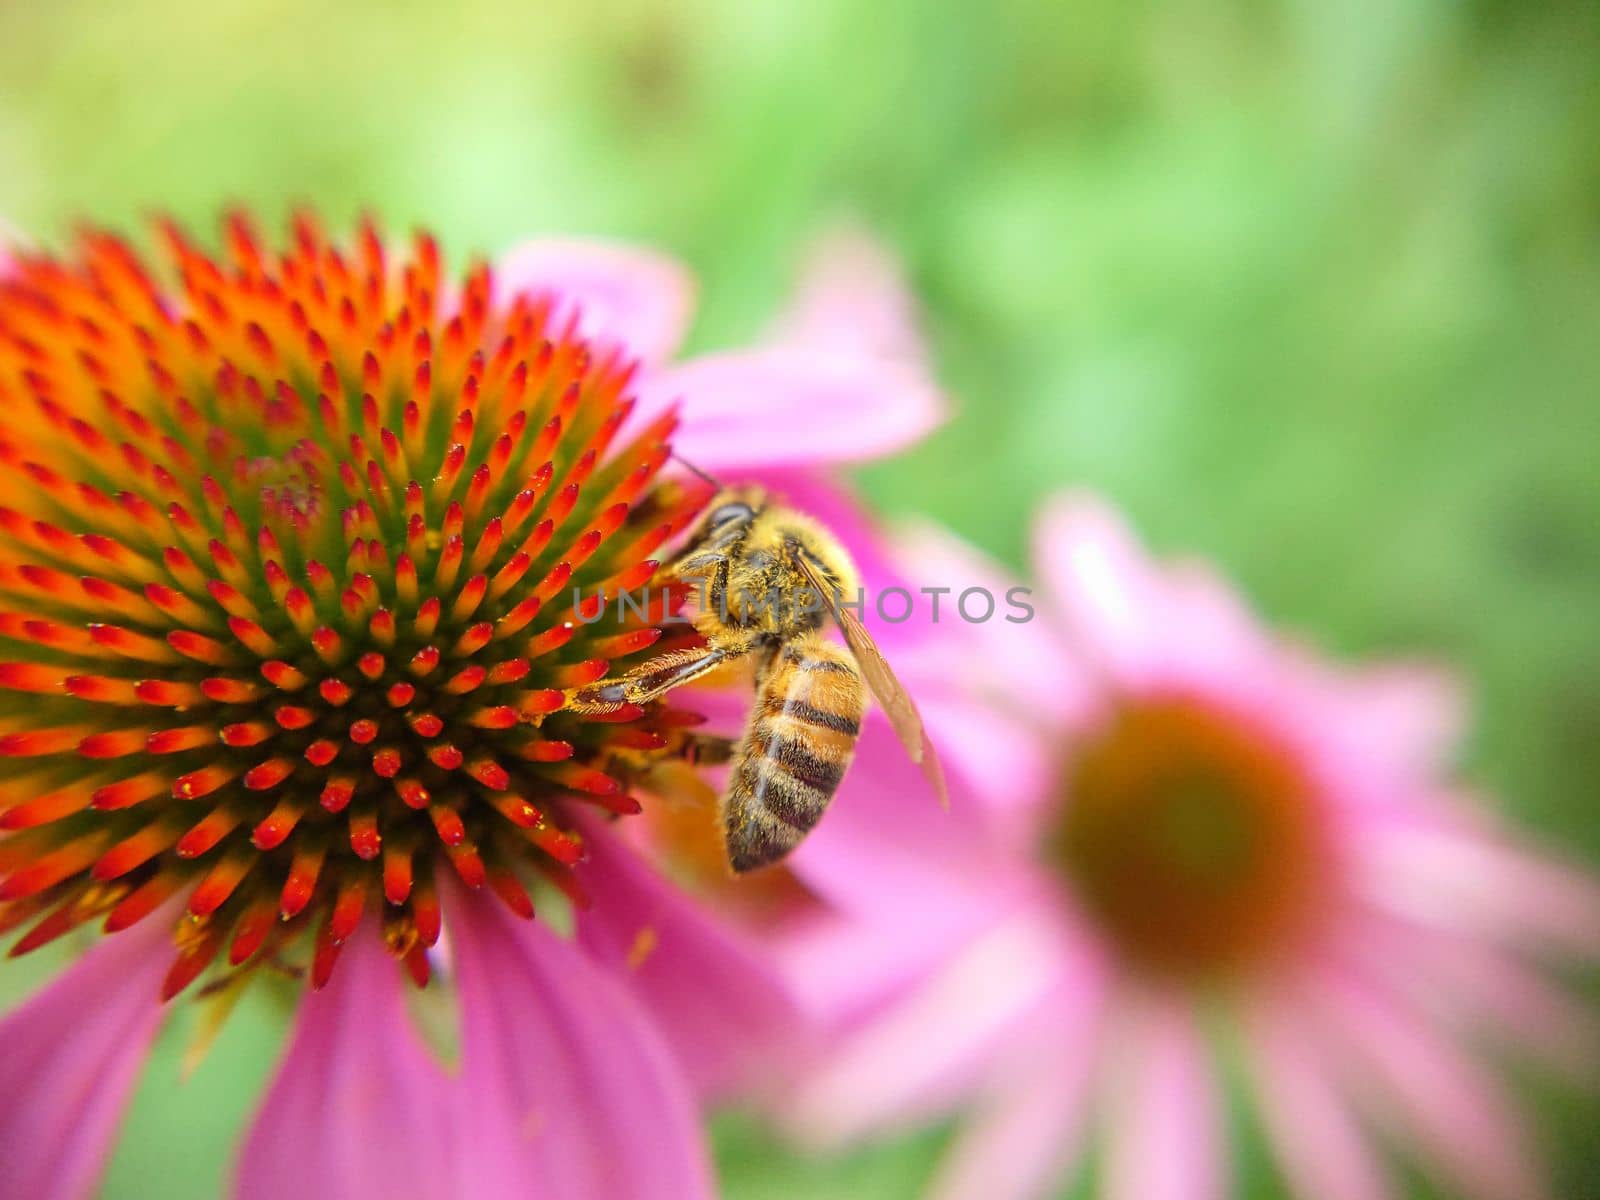 Background texture of an echinacea flower with a bee collecting nectar on the surface.Macrophotography.Texture or background.Selective focus.